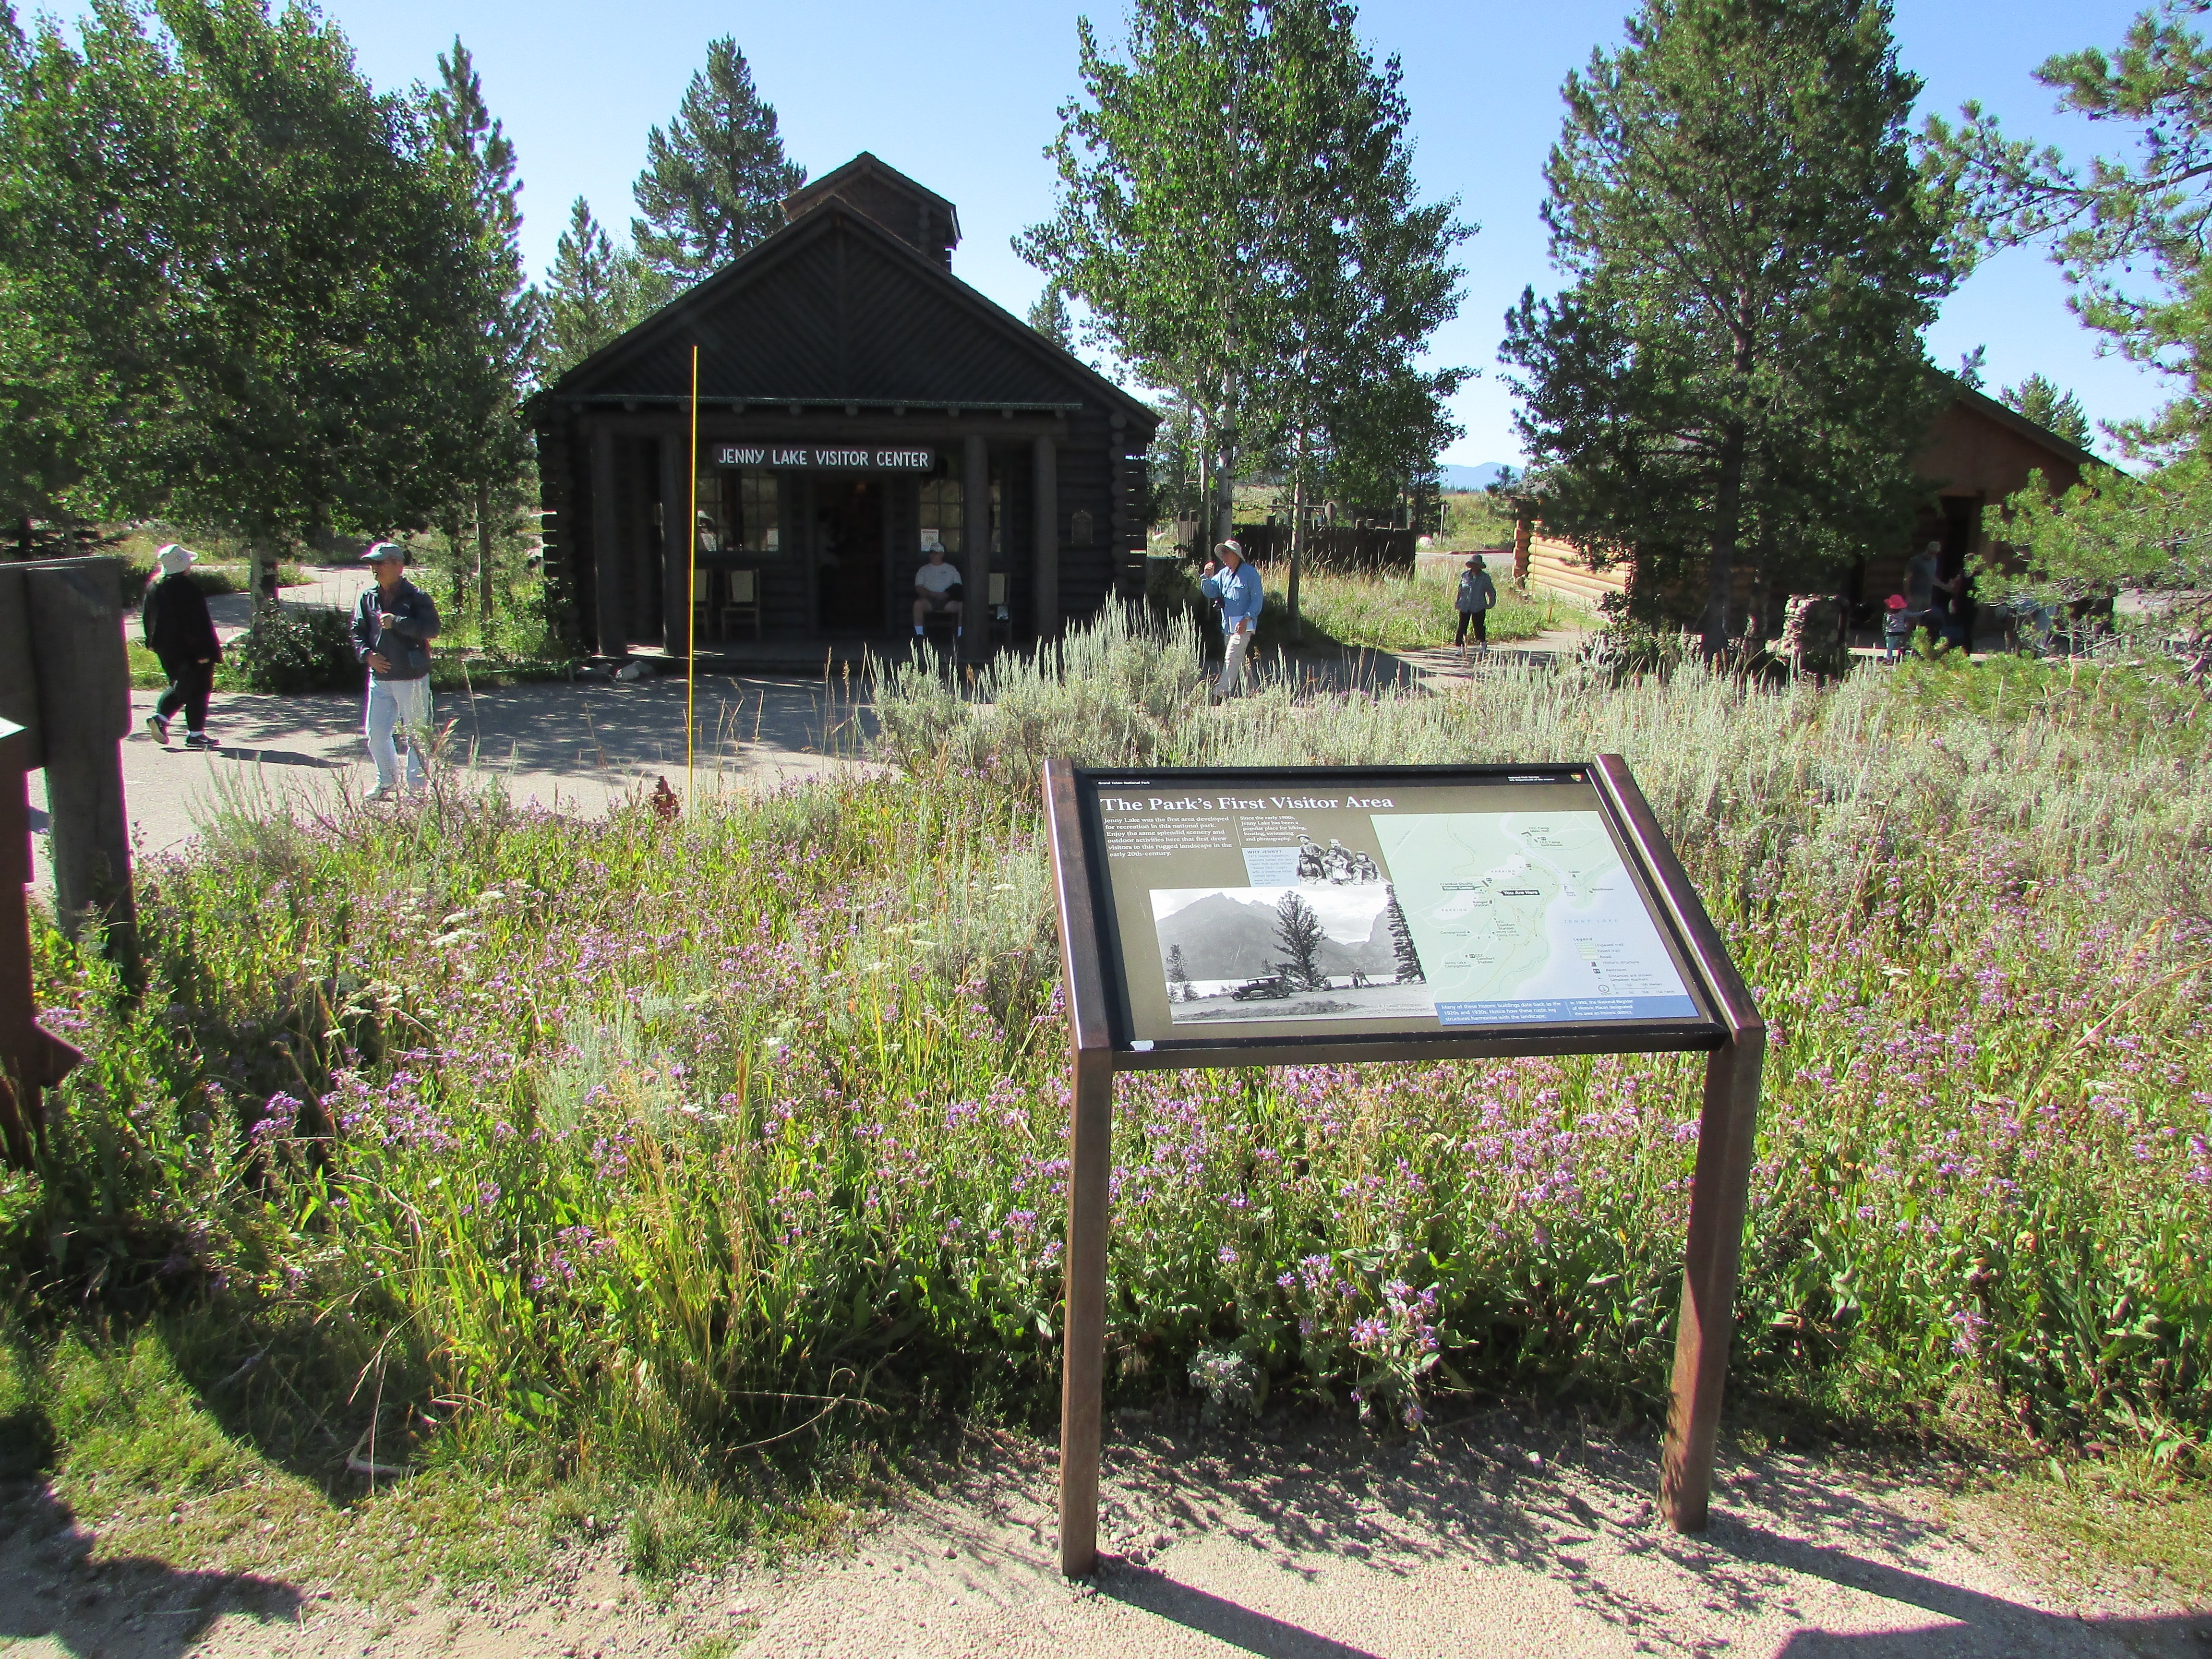 The Park’s First Visitor Area Marker